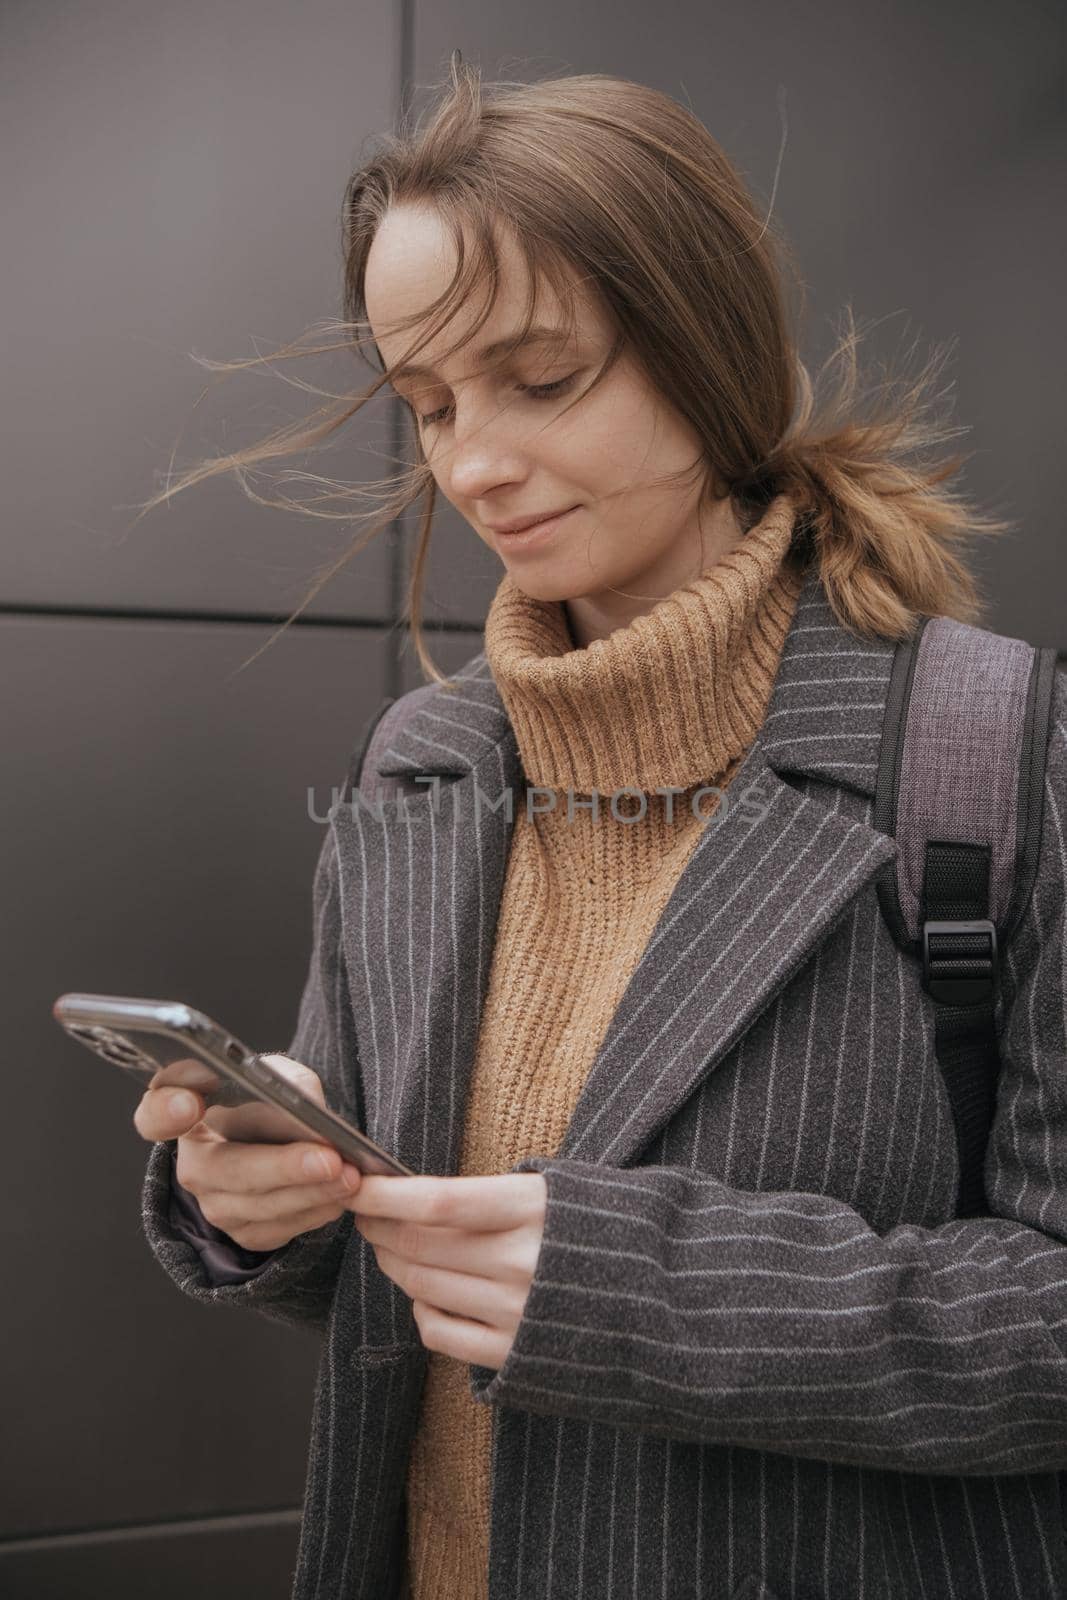 Portrait of happy hipster woman typing by mobile phone outdoors. Closeup cheerful girl walking with smartphone in urban background. Smiling lady holding cellphone in hands outside.